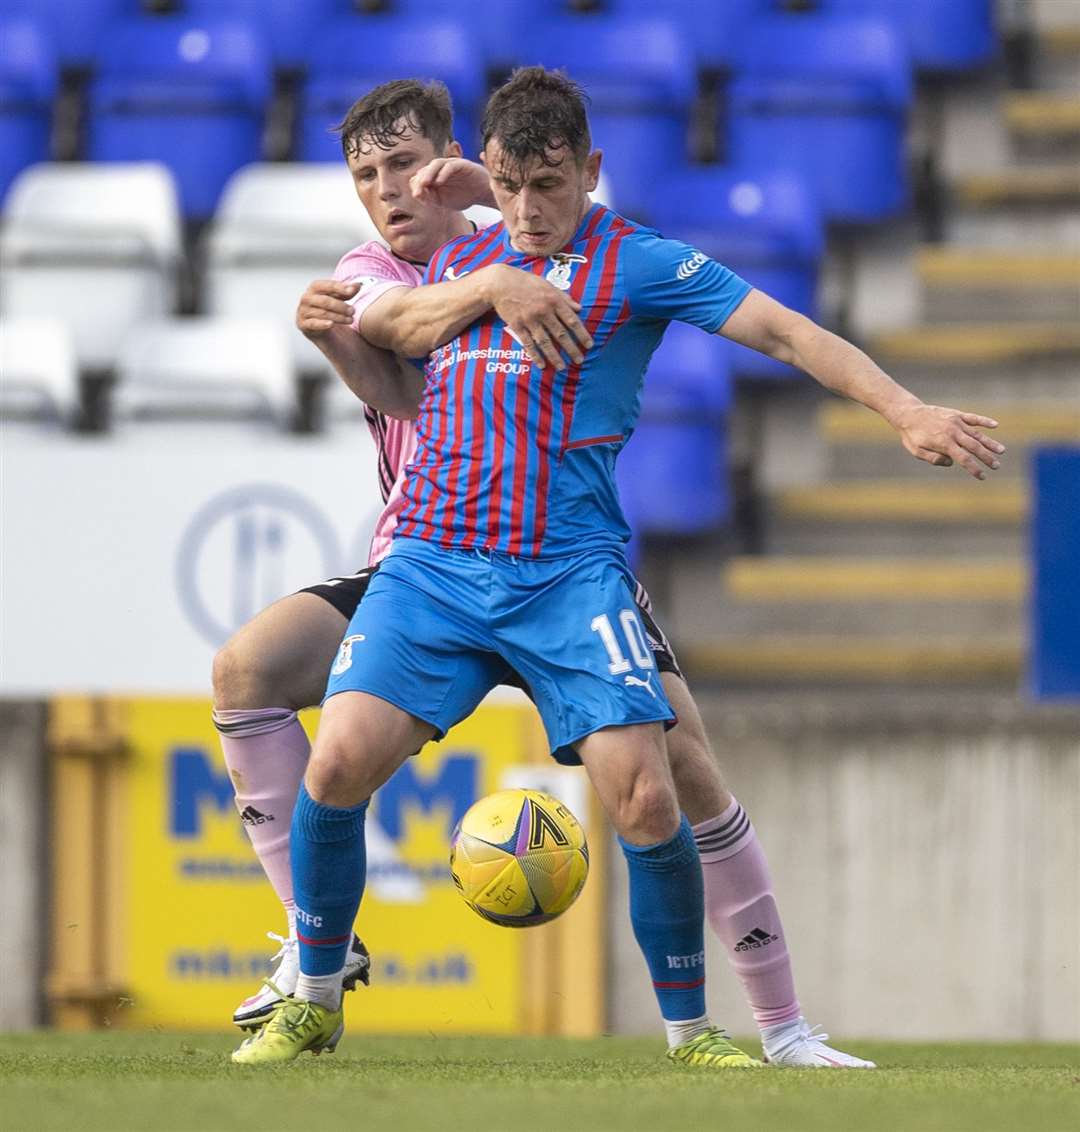 Picture - Ken Macpherson, Inverness. Scottish Premier Sports Cup. Inverness CT(2) v Peterhead(0). 13.07.21. ICT’s Aaron Doran holds off a strong challenge from Peterhead's Josh Mulligan.